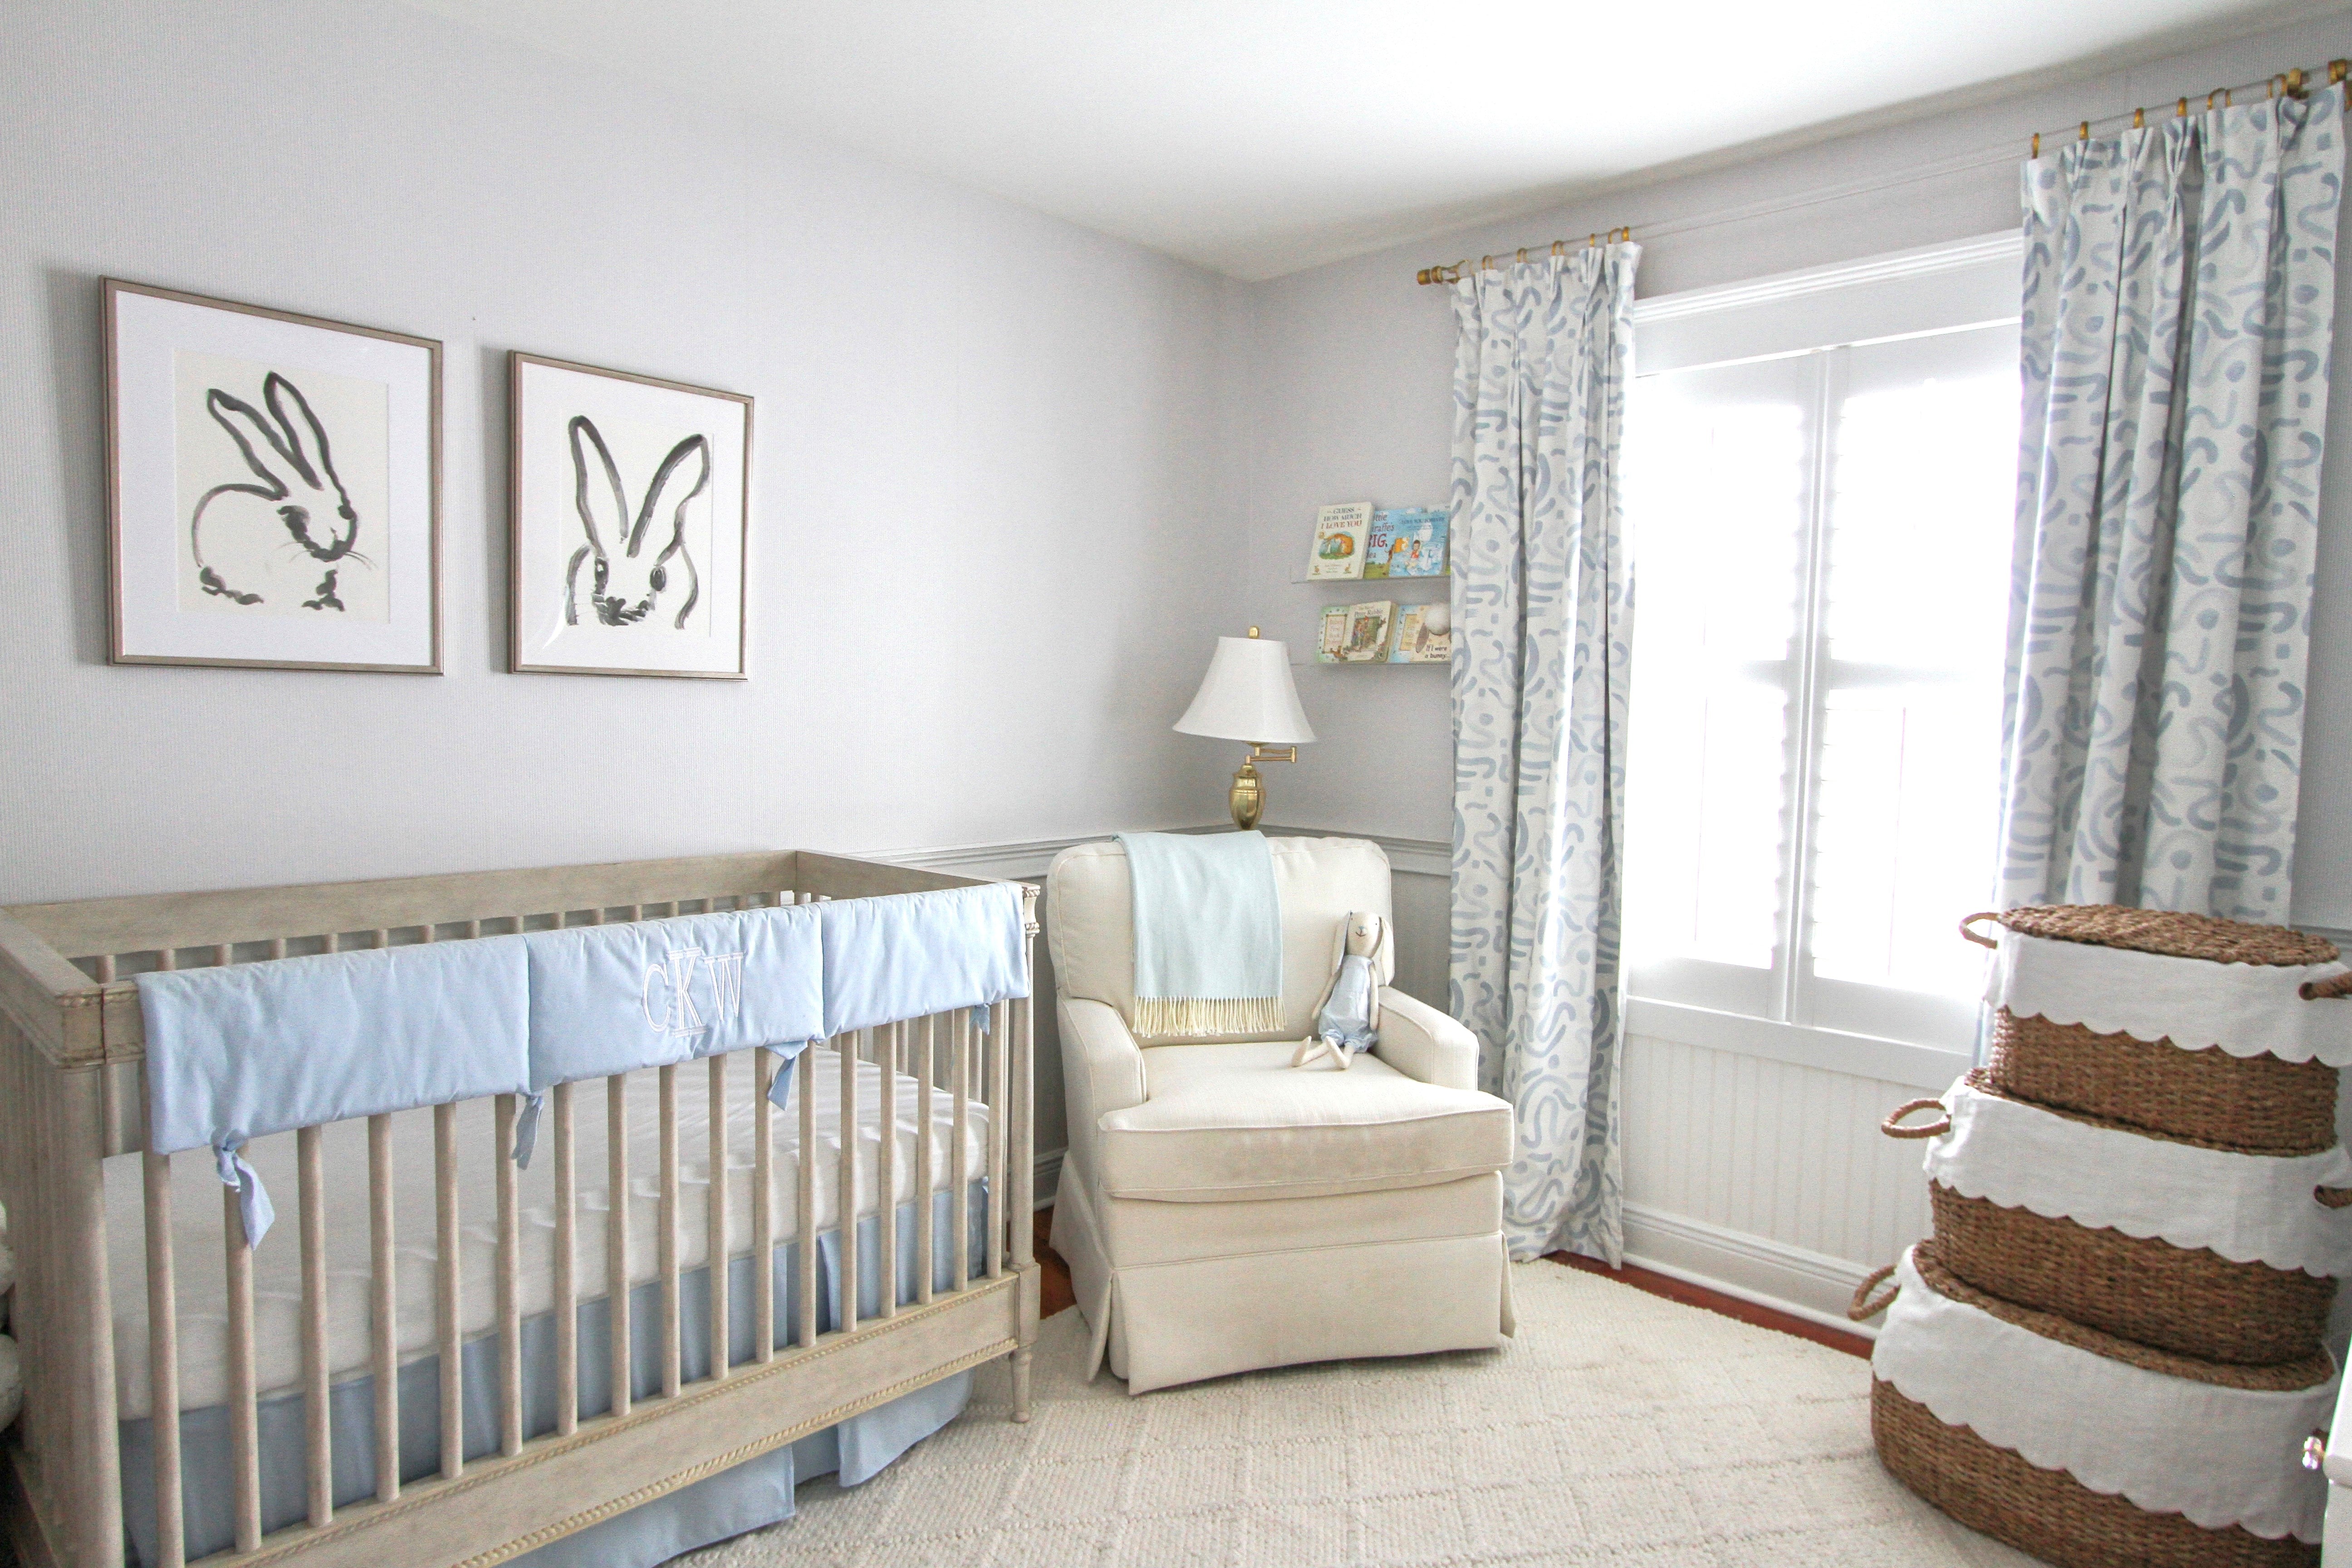 Blue abstract custom curtain hanging on a window in a nursery with a white glider and white crib with rabbit artwork